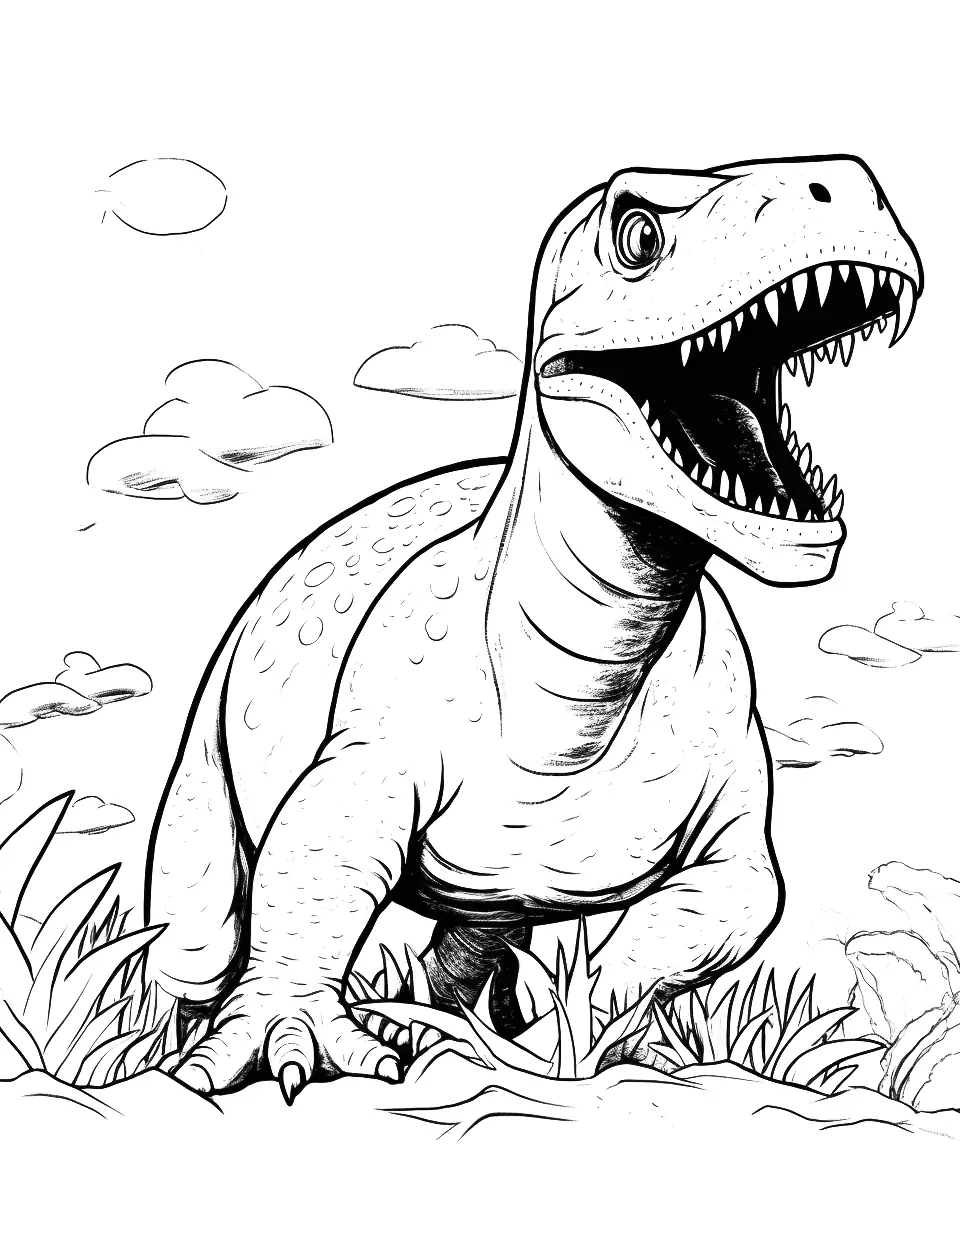 Indoraptor Chase Dinosaur Coloring Page - The Indoraptor chasing the heroes in a thrilling scene.